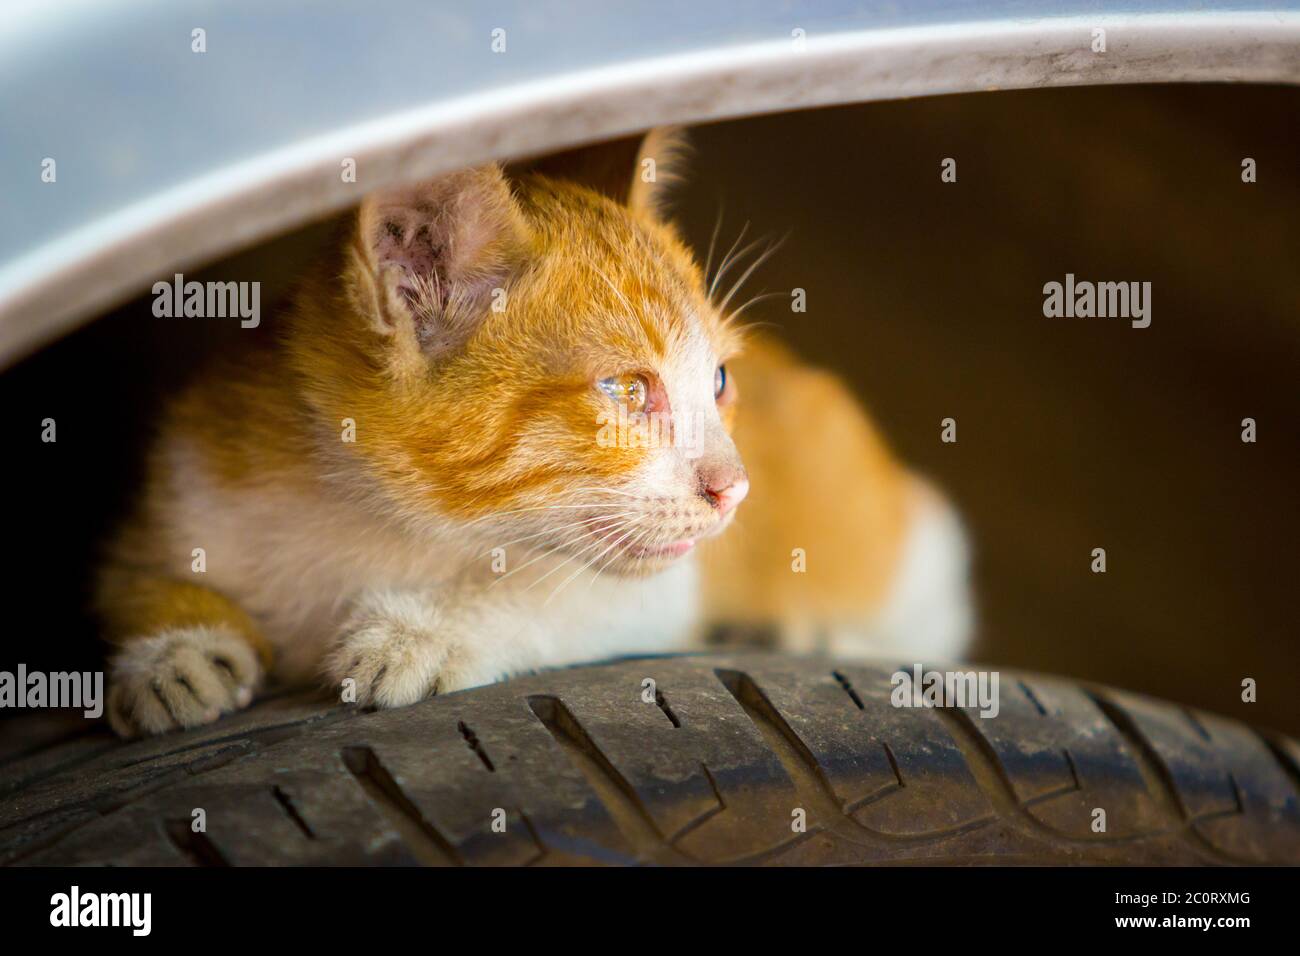 cat hide inside the car over the tire, safety for you pet concept Stock Photo